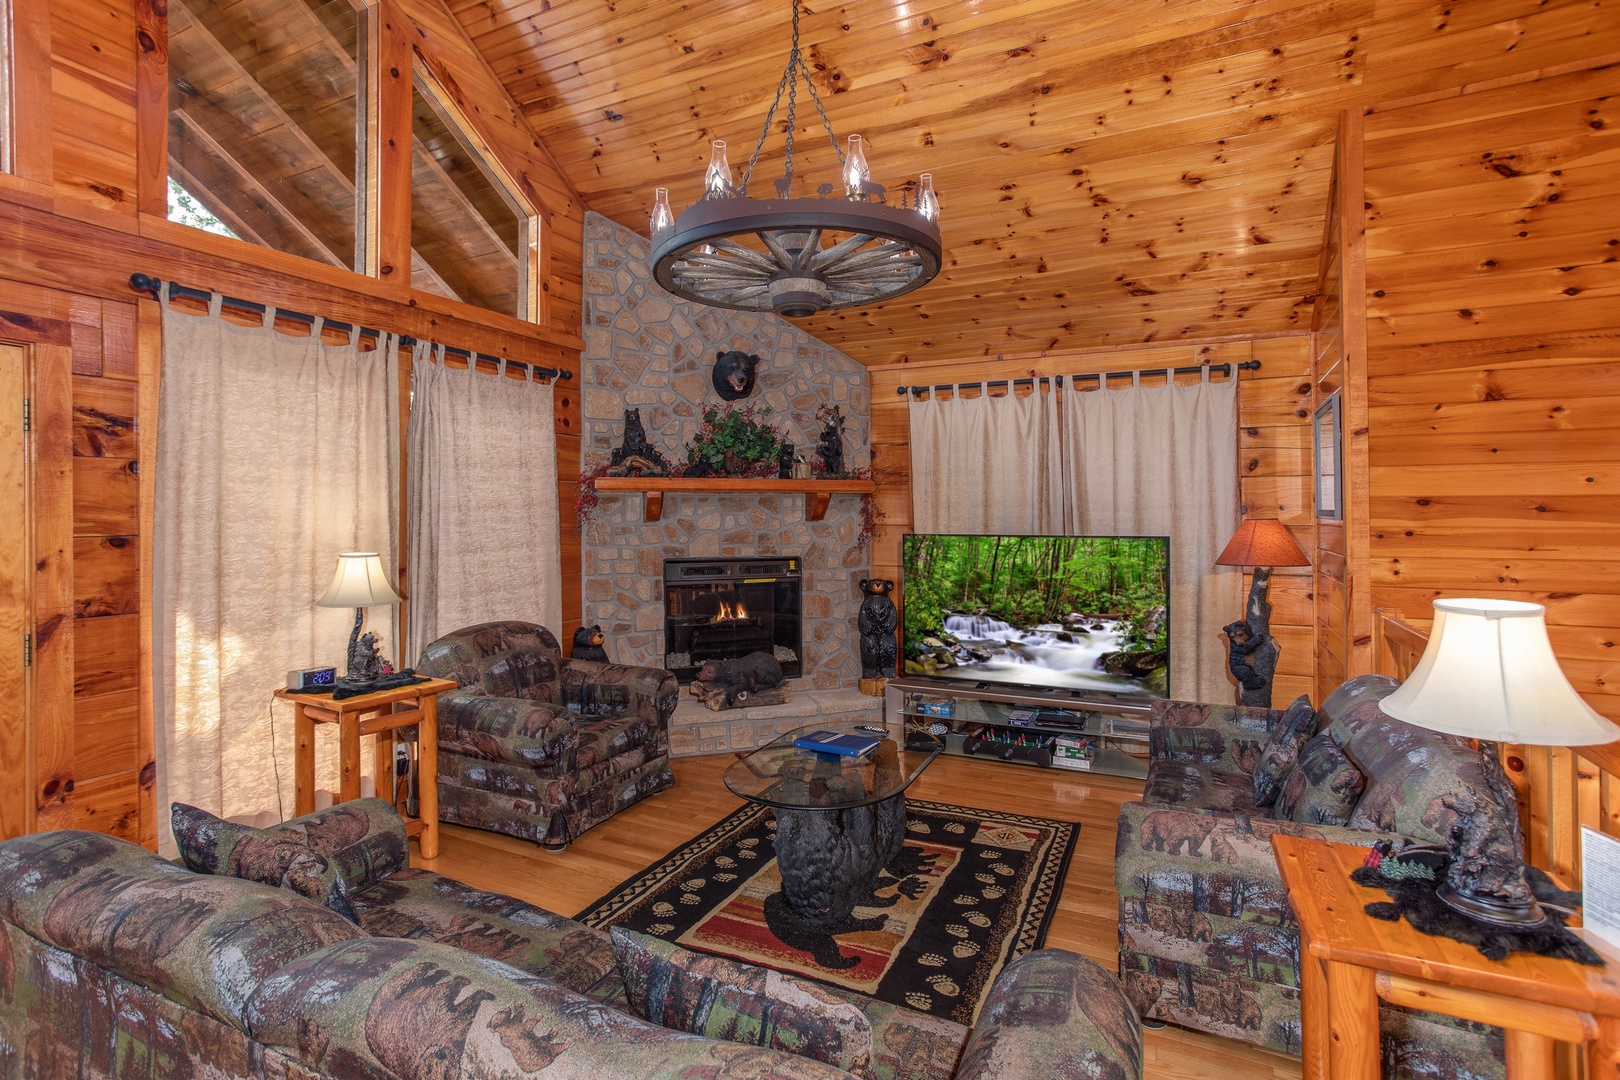 Living room with corner stone fireplace and wagon wheel chandelier at Bear Country, a 3-bedroom cabin rental located in Pigeon Forge